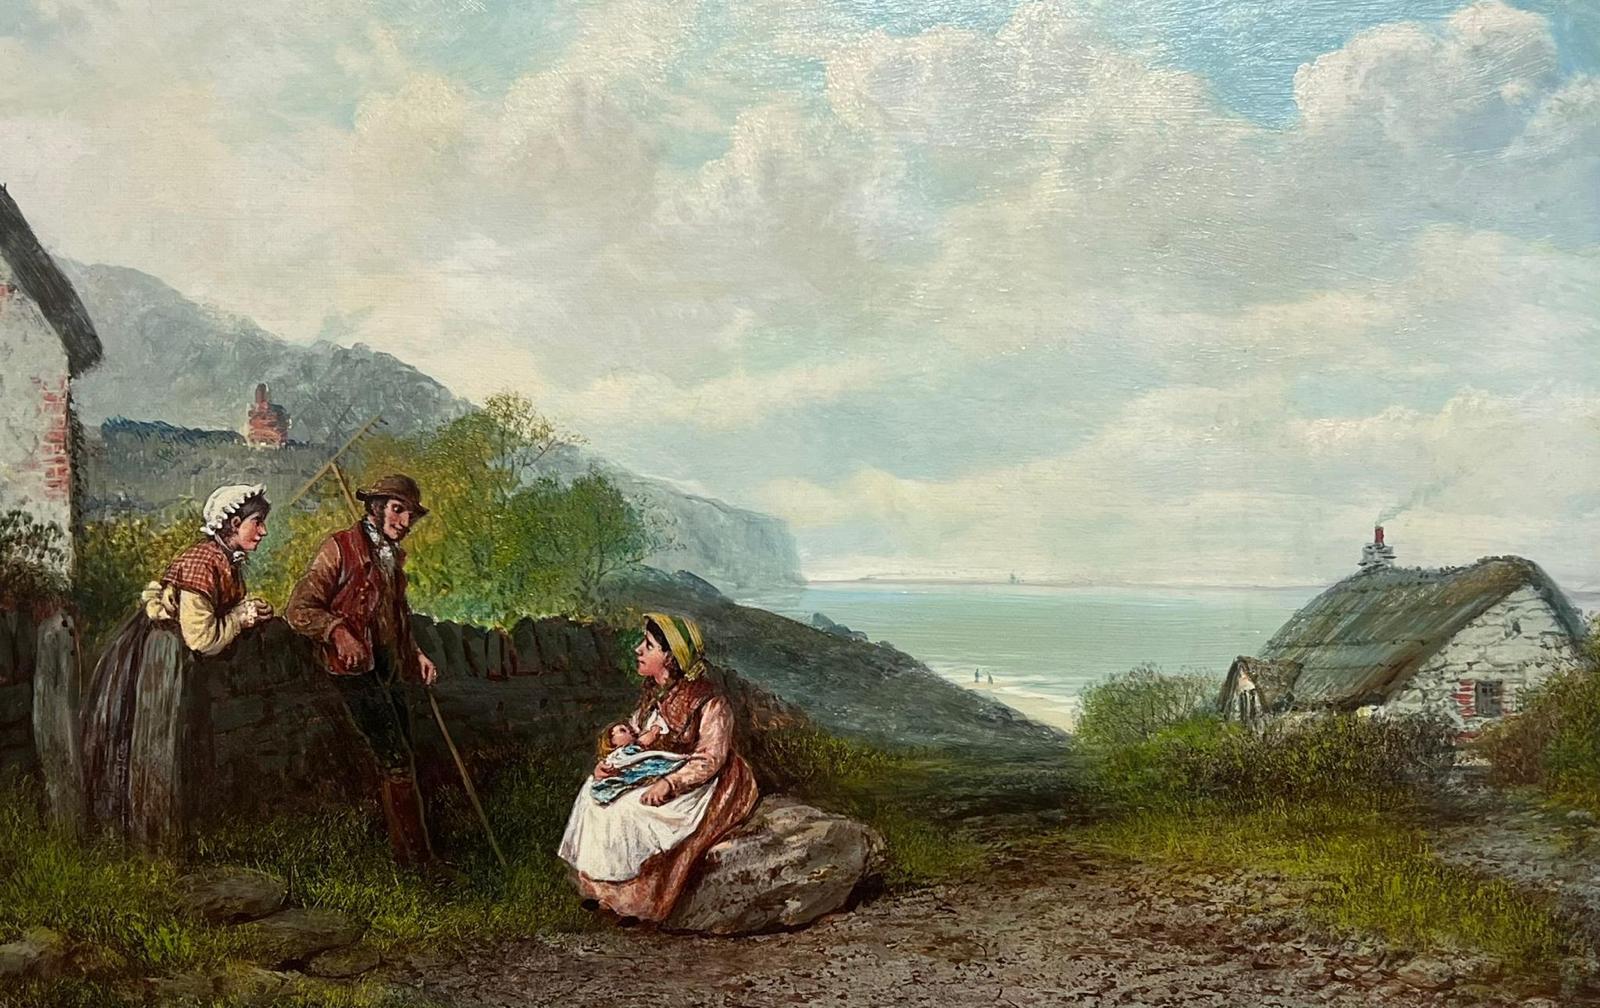 The Coastal Cottage (most likely Devon or Cornwall)
British School, 19th century
oil on canvas, framed
framed: 17 x 23 inches
painting: 12 x 18 inches
provenance: private collection, England
condition: very good and sound condition